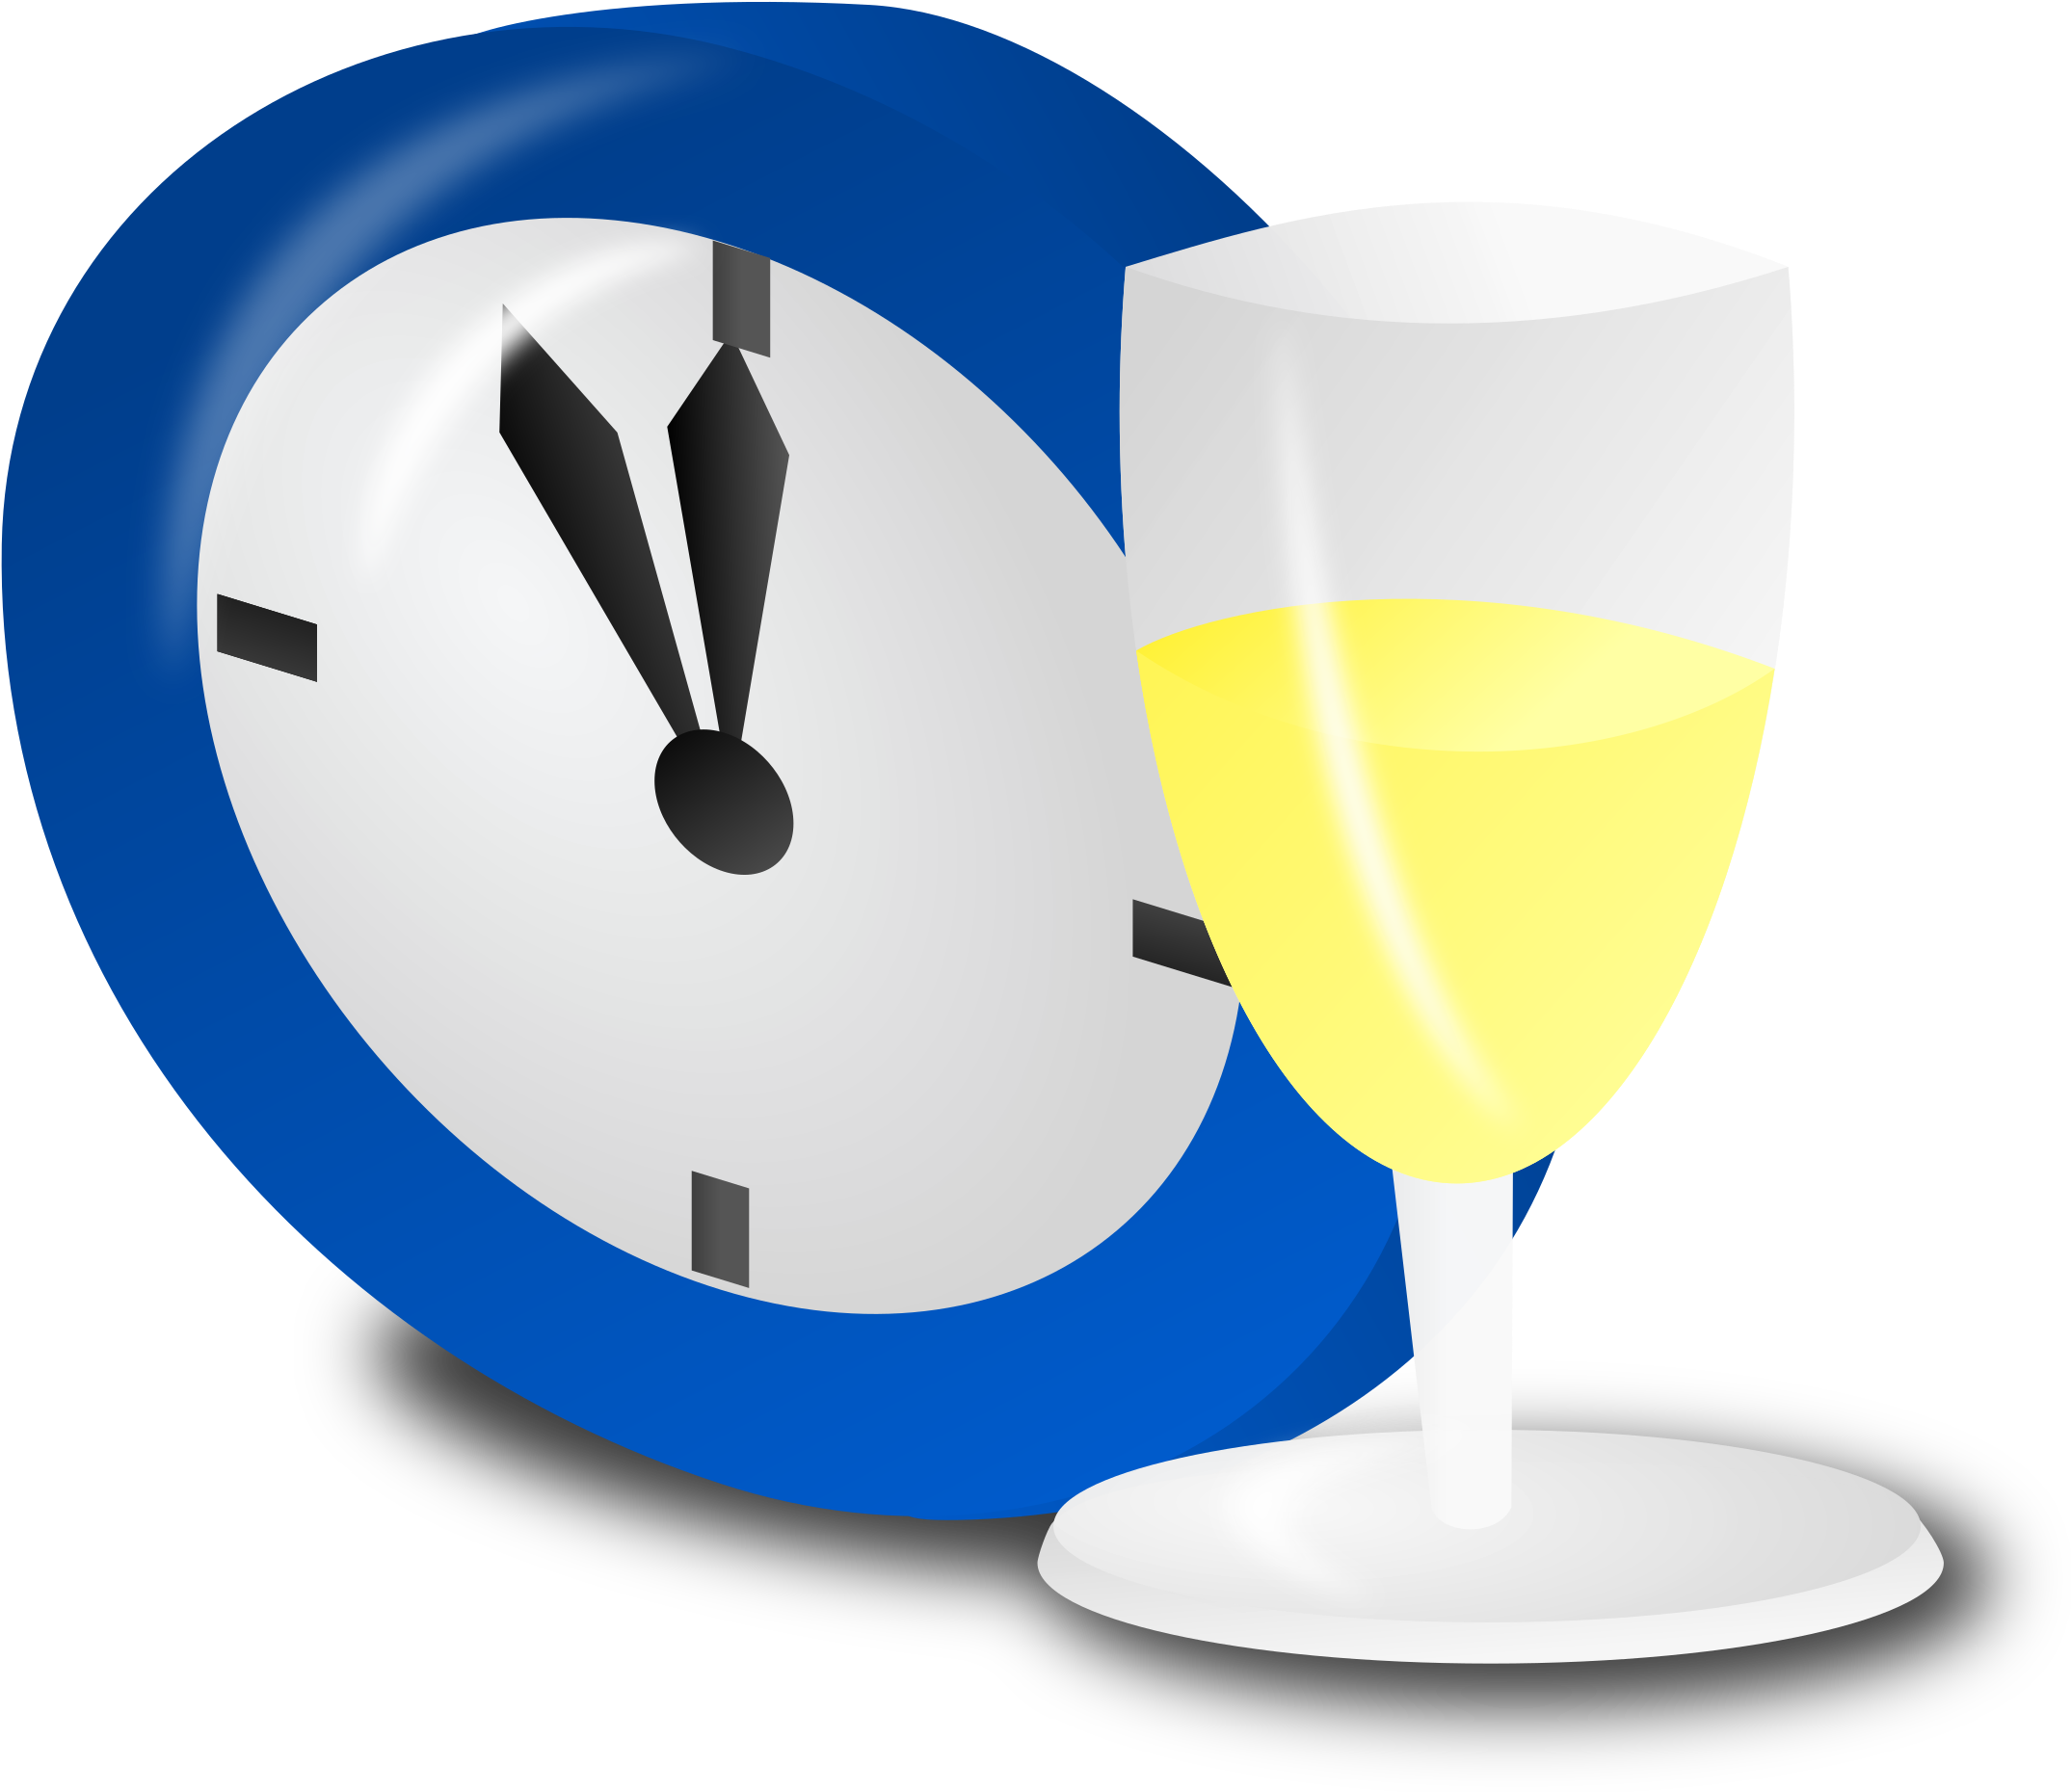 Clock And Champagne - New Years Clock Transparent (2400x2400)